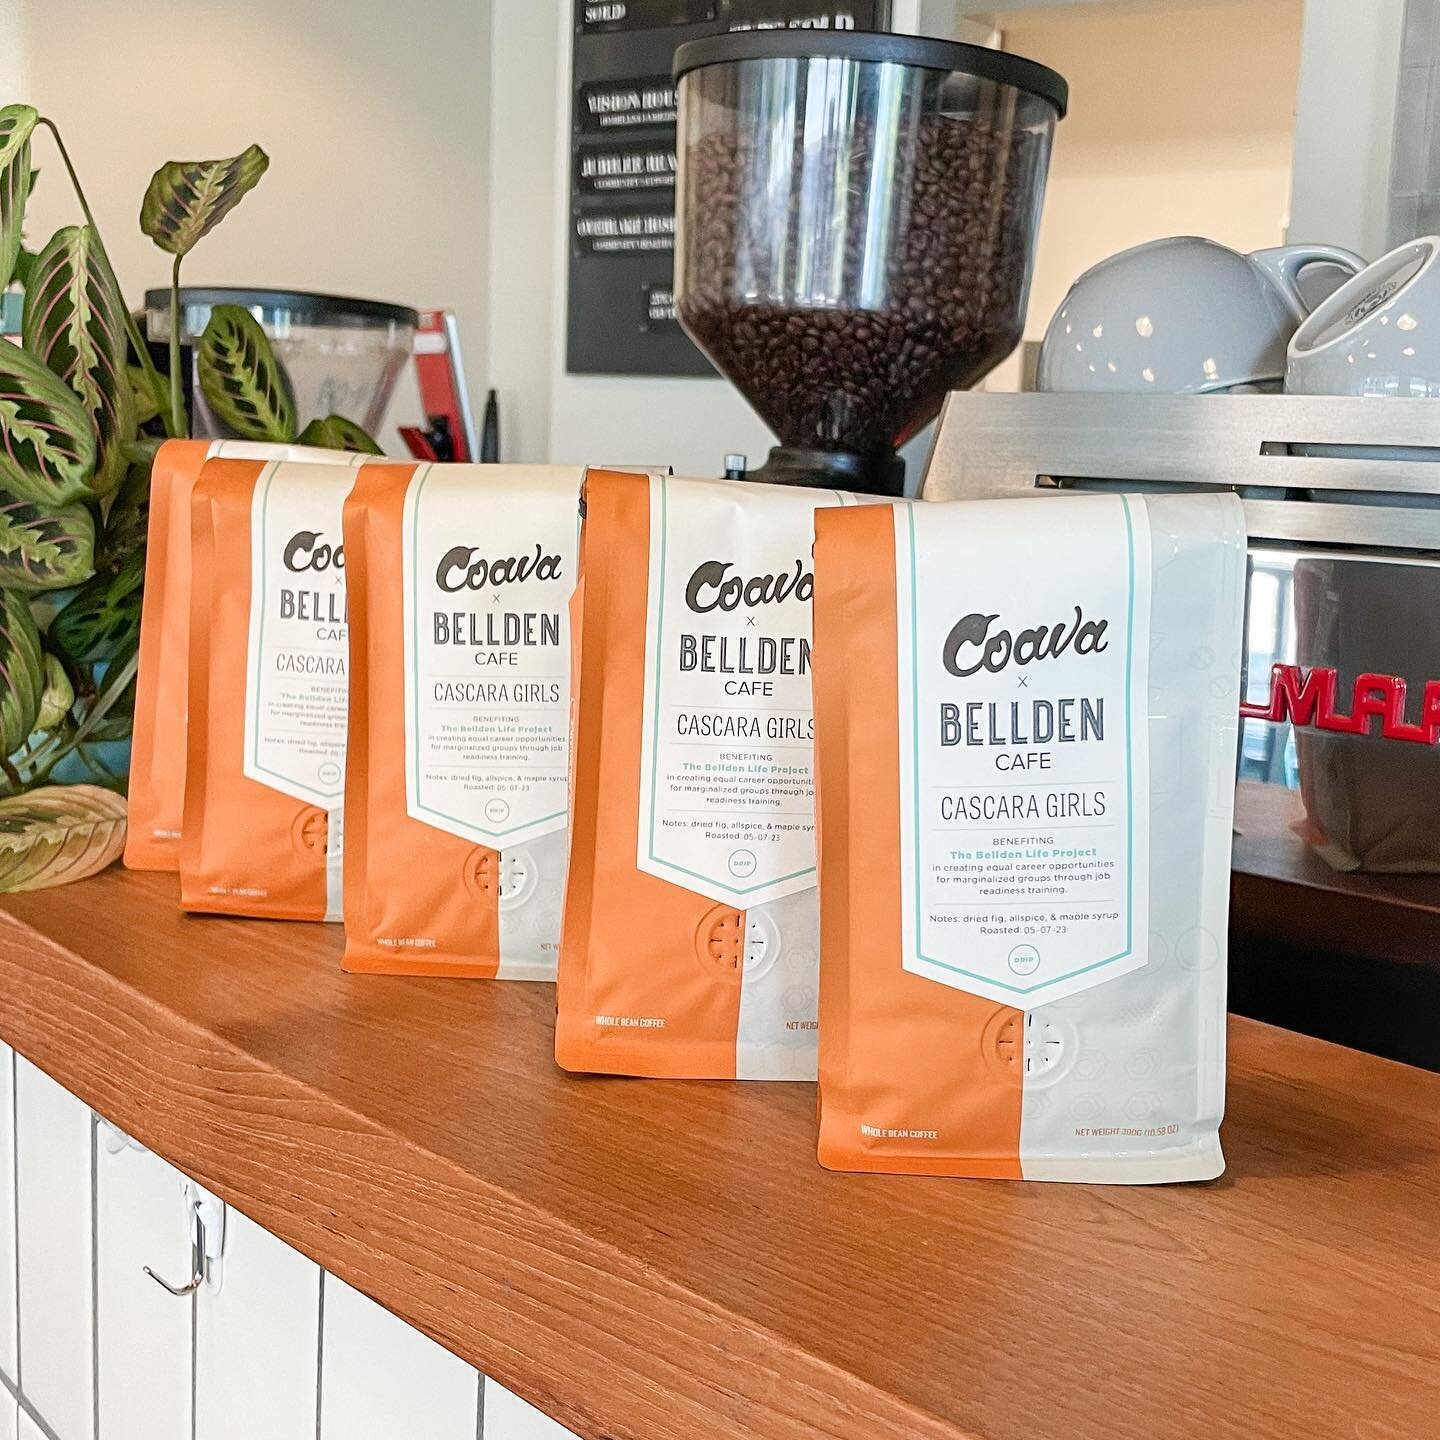 We love love everything about this collaboration with @coavacoffee !! 

100% of the proceed benefits marginalized group who are looking for long term career opportunities! Order now!! 

.
.
.
#teambellden #belldencafe #togetherwearestronger ##sociale